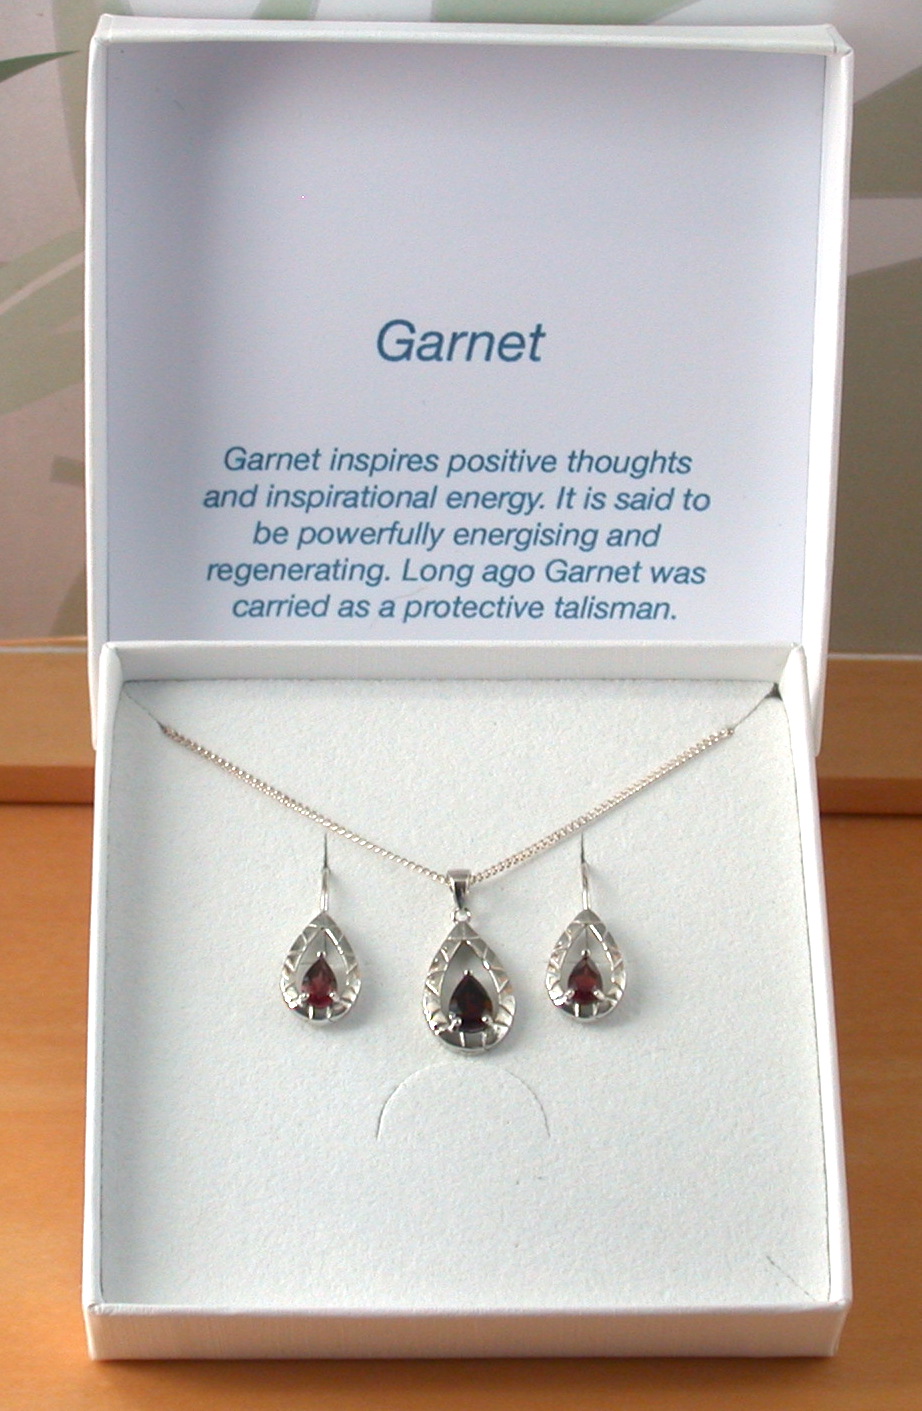 garnet necklace and earrings